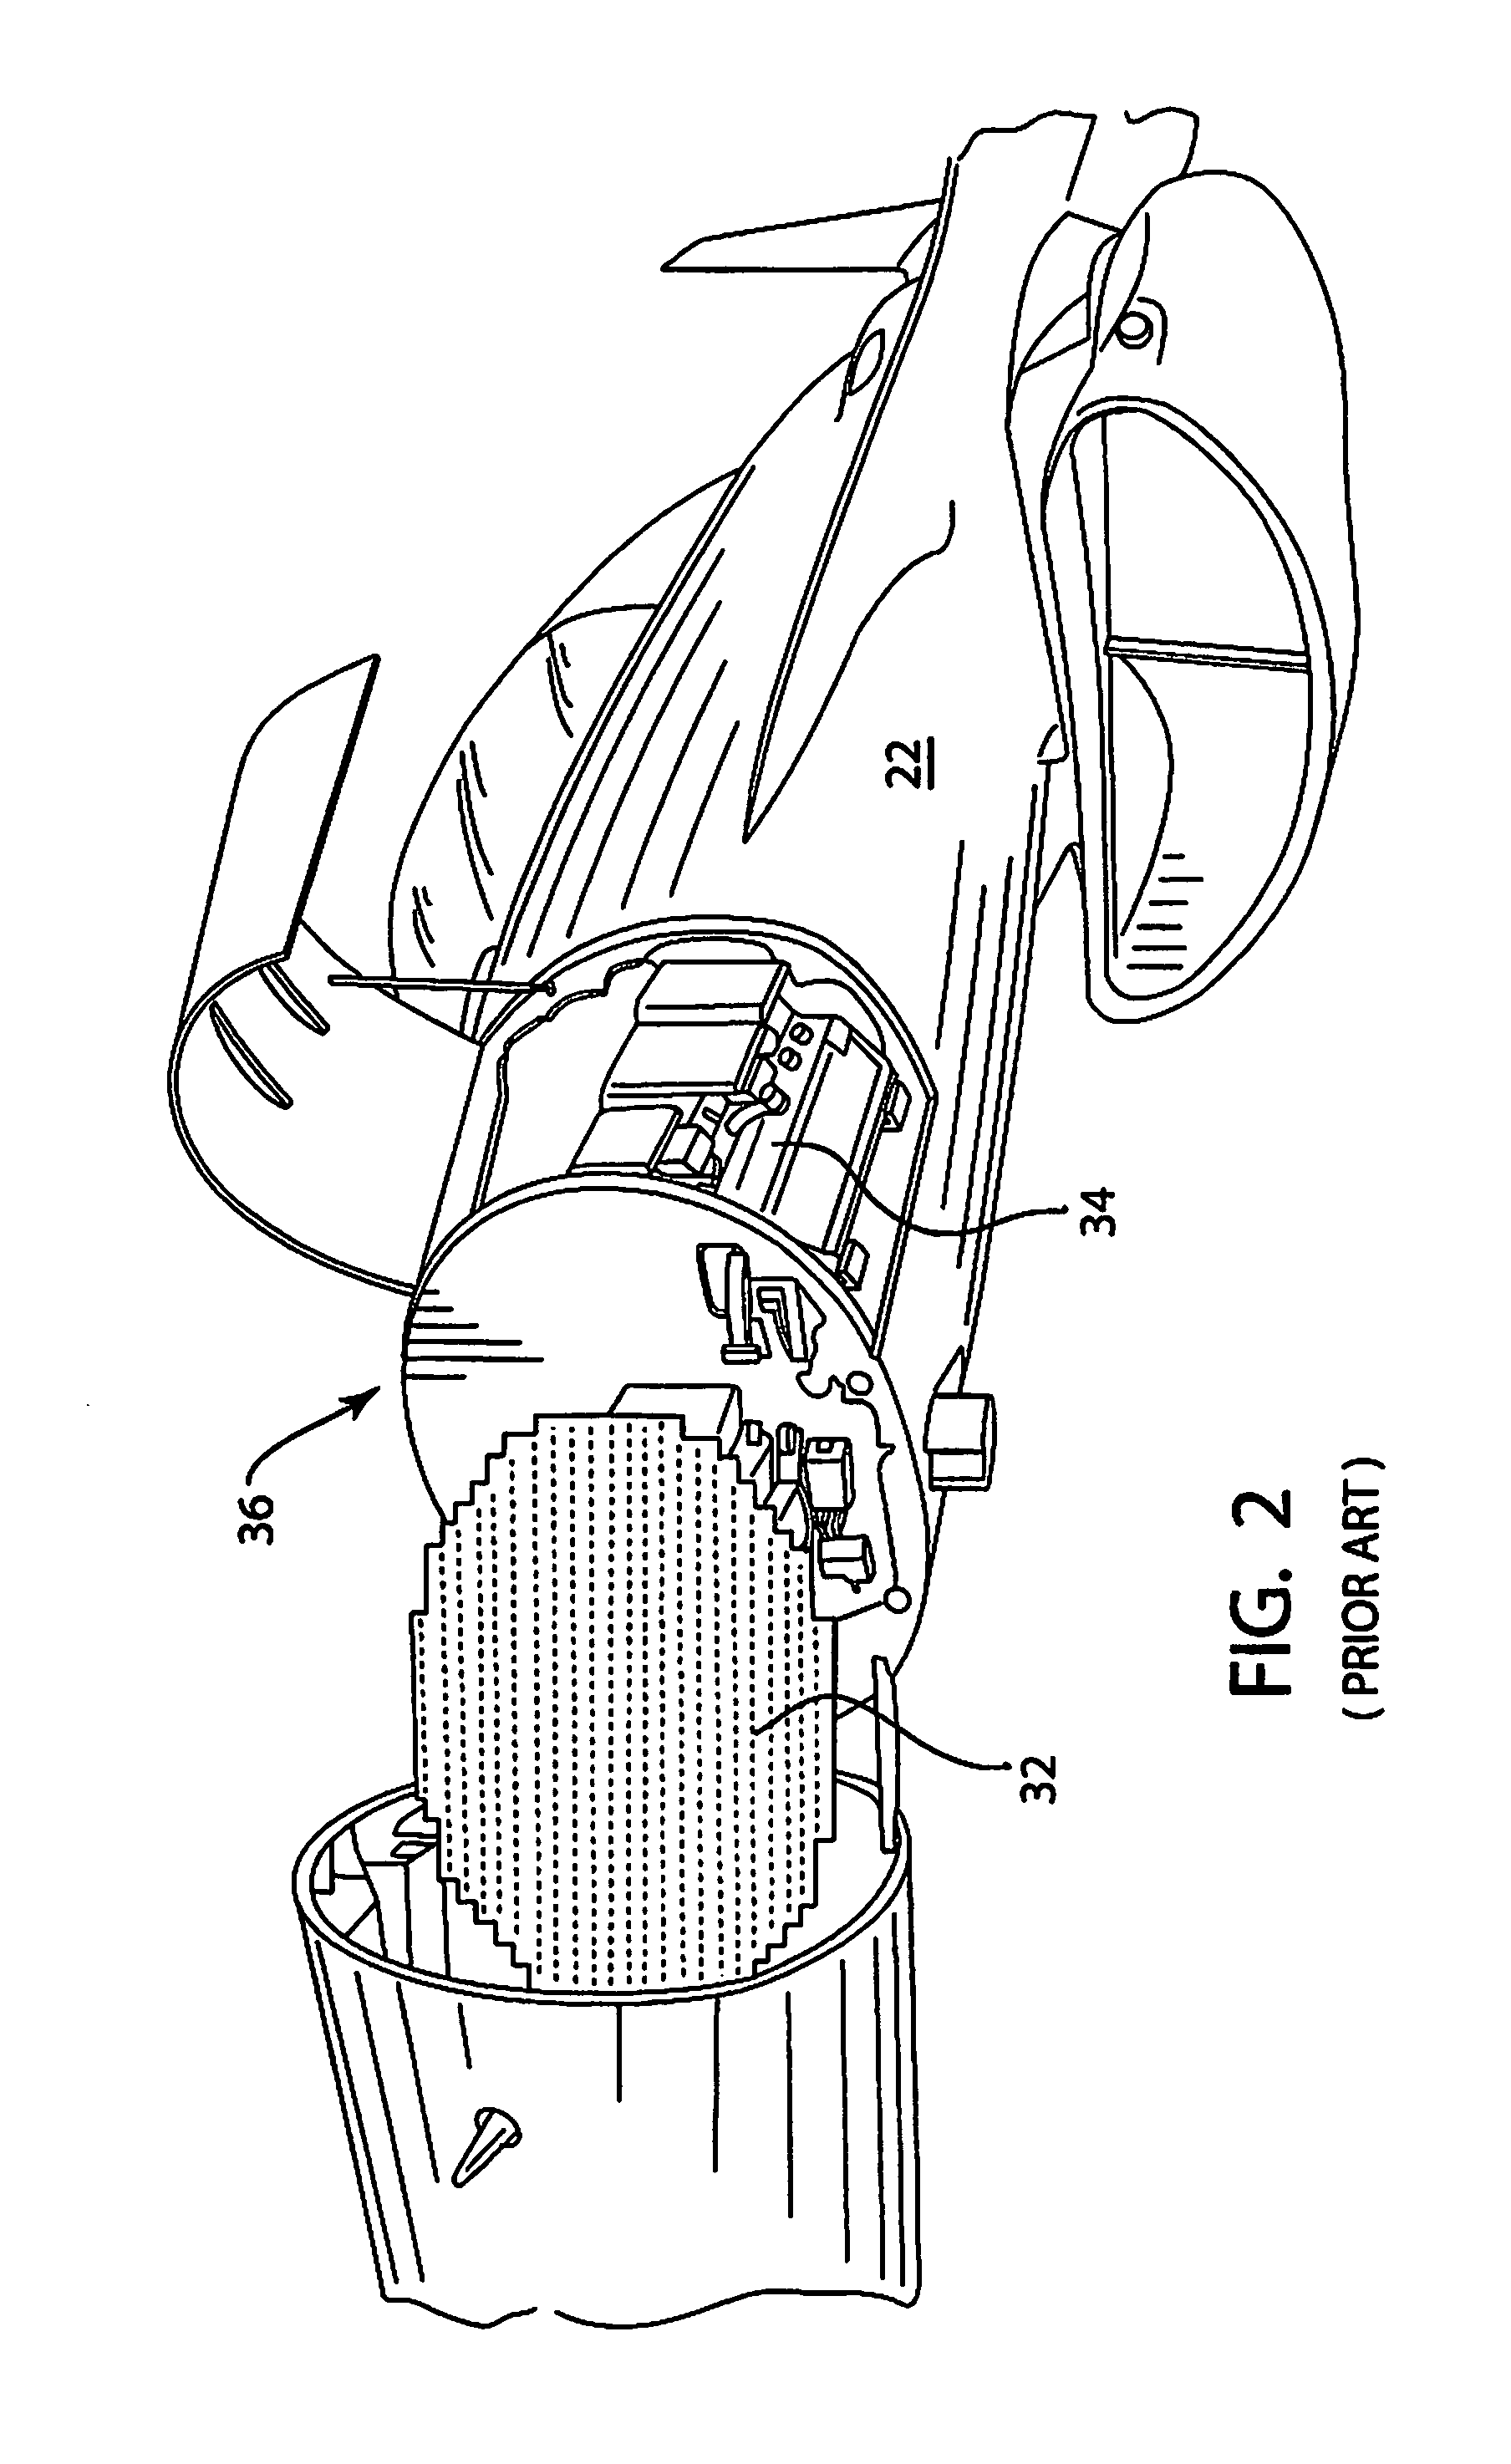 Method for cleaning and reconditioning FCR APG-68 tactical radar units